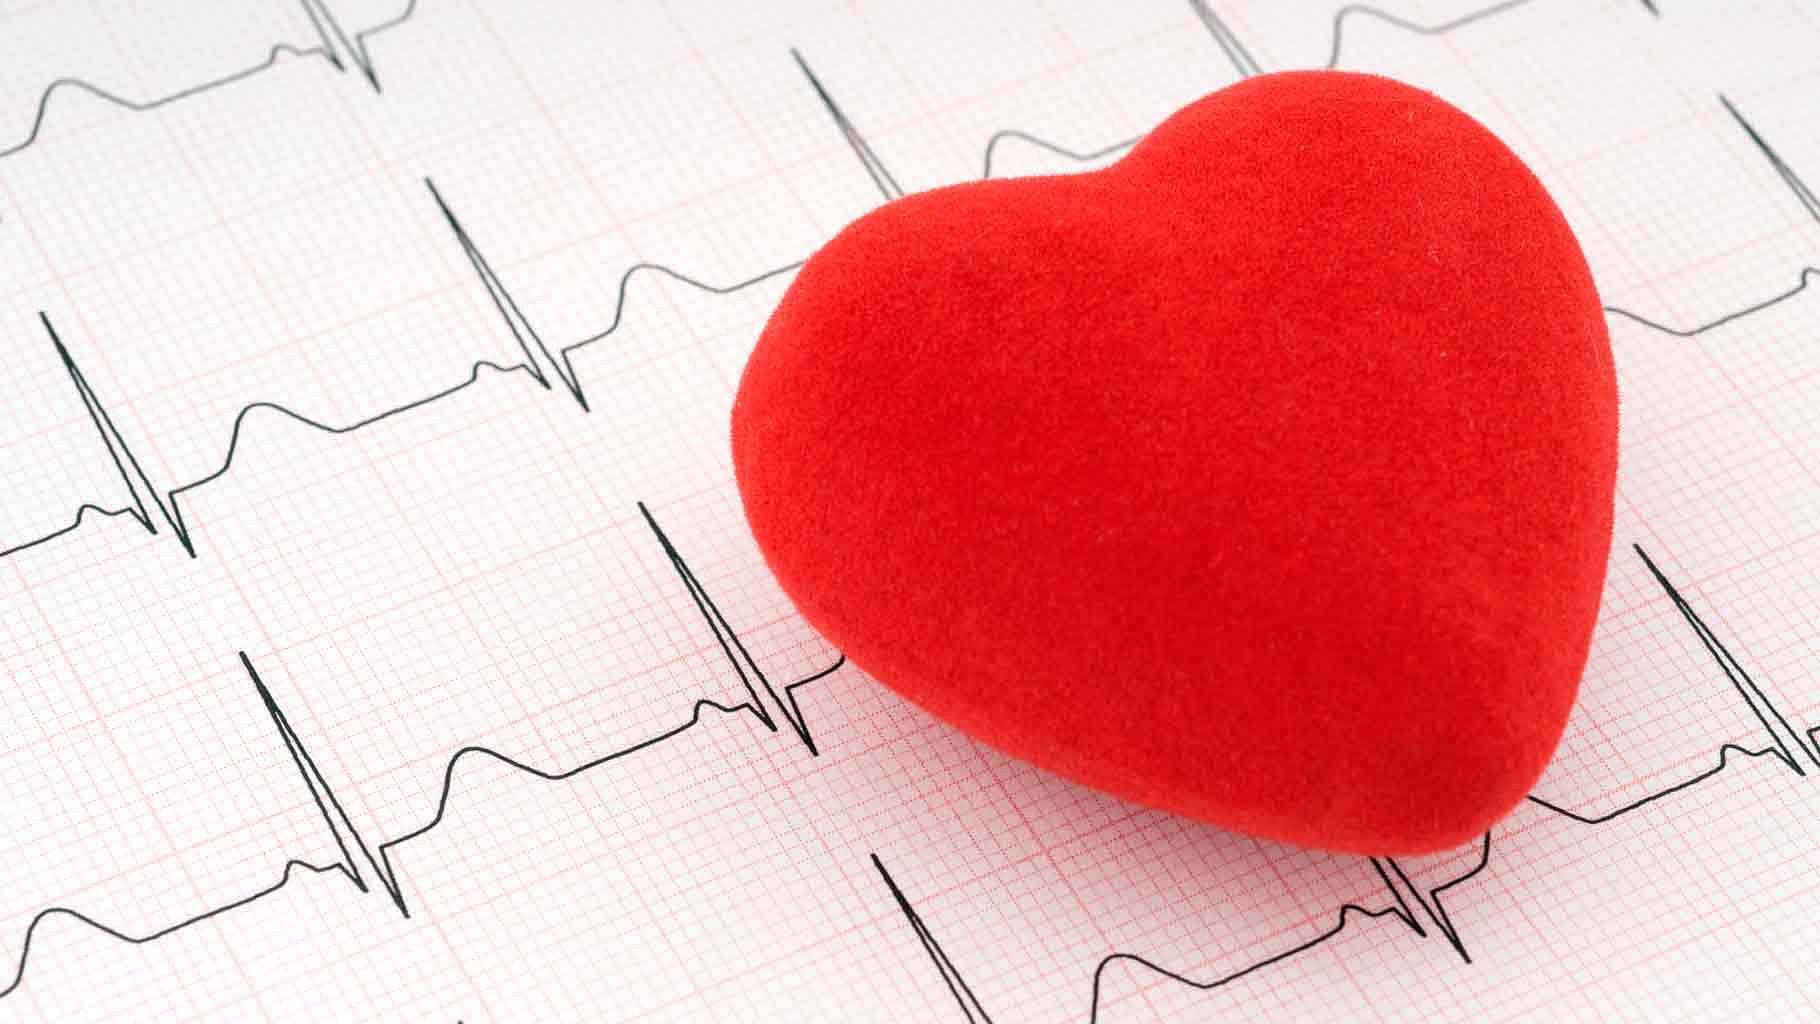 The work not only offers promise in the diagnosis or prediction of heart disorders within minutes but can also be extended to detection of other diseases